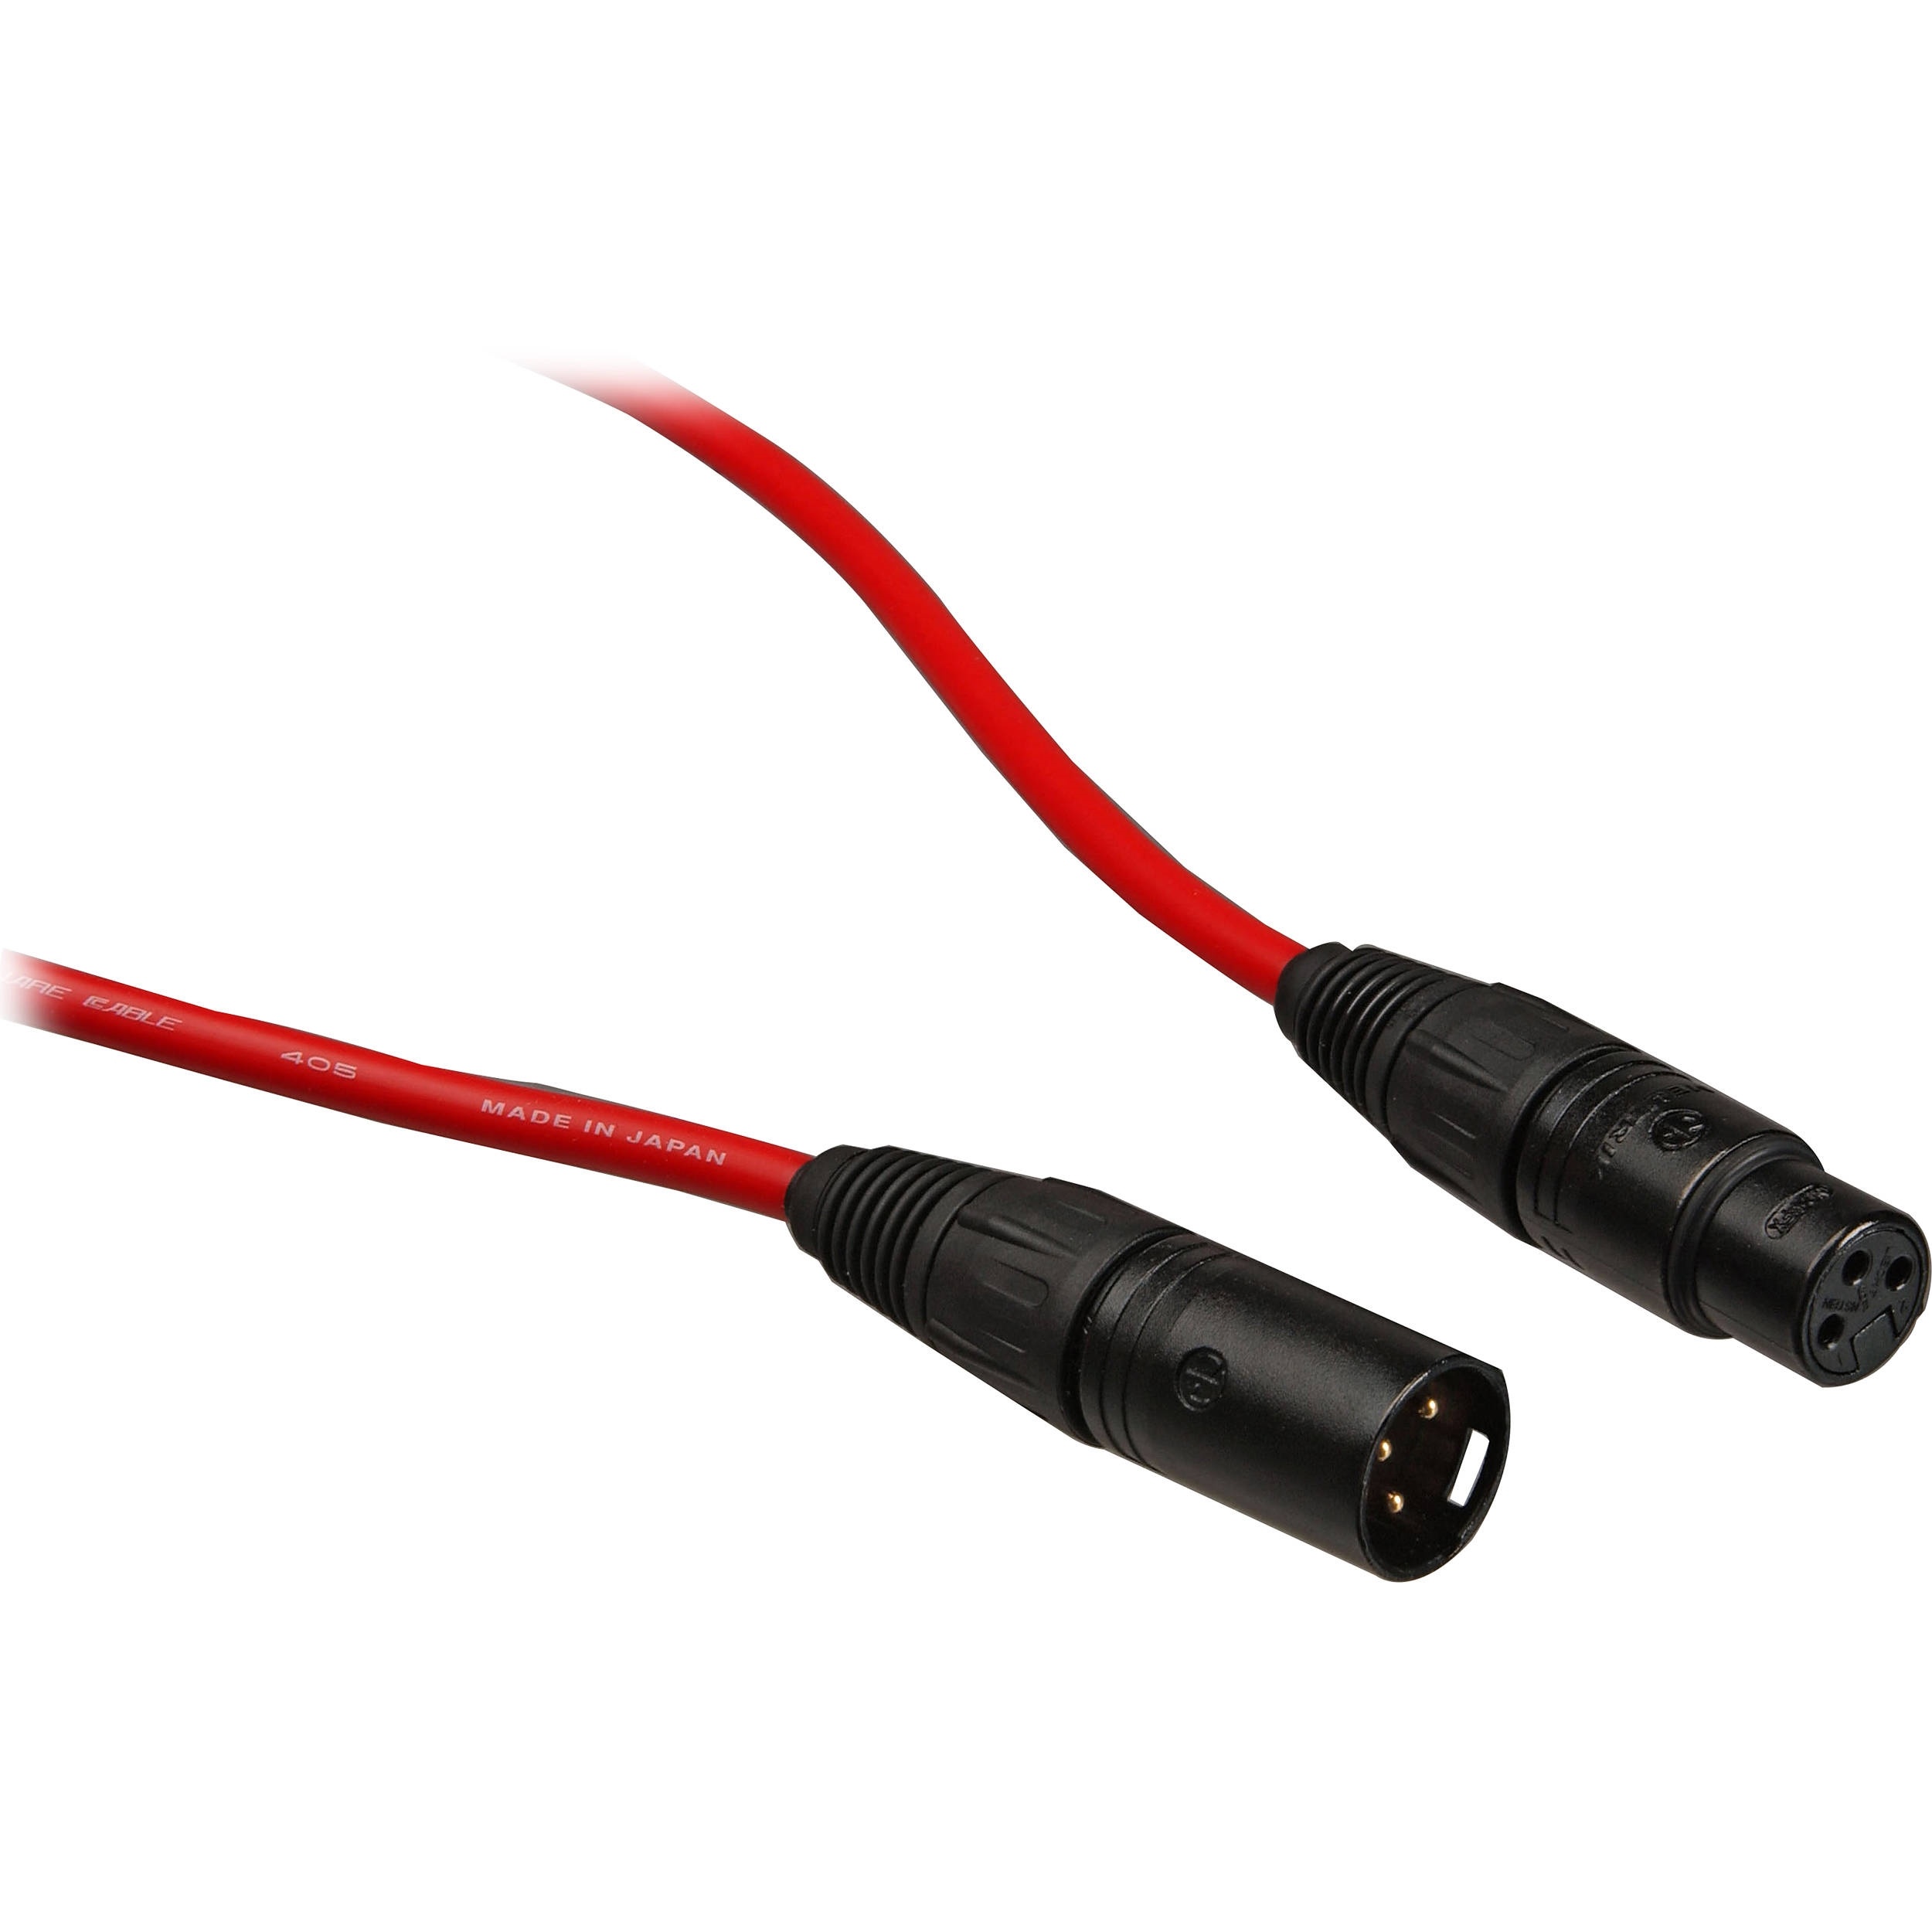 Canare L-4E6S Star Quad XLRM to XLRF Microphone Cable - 3' (Red)